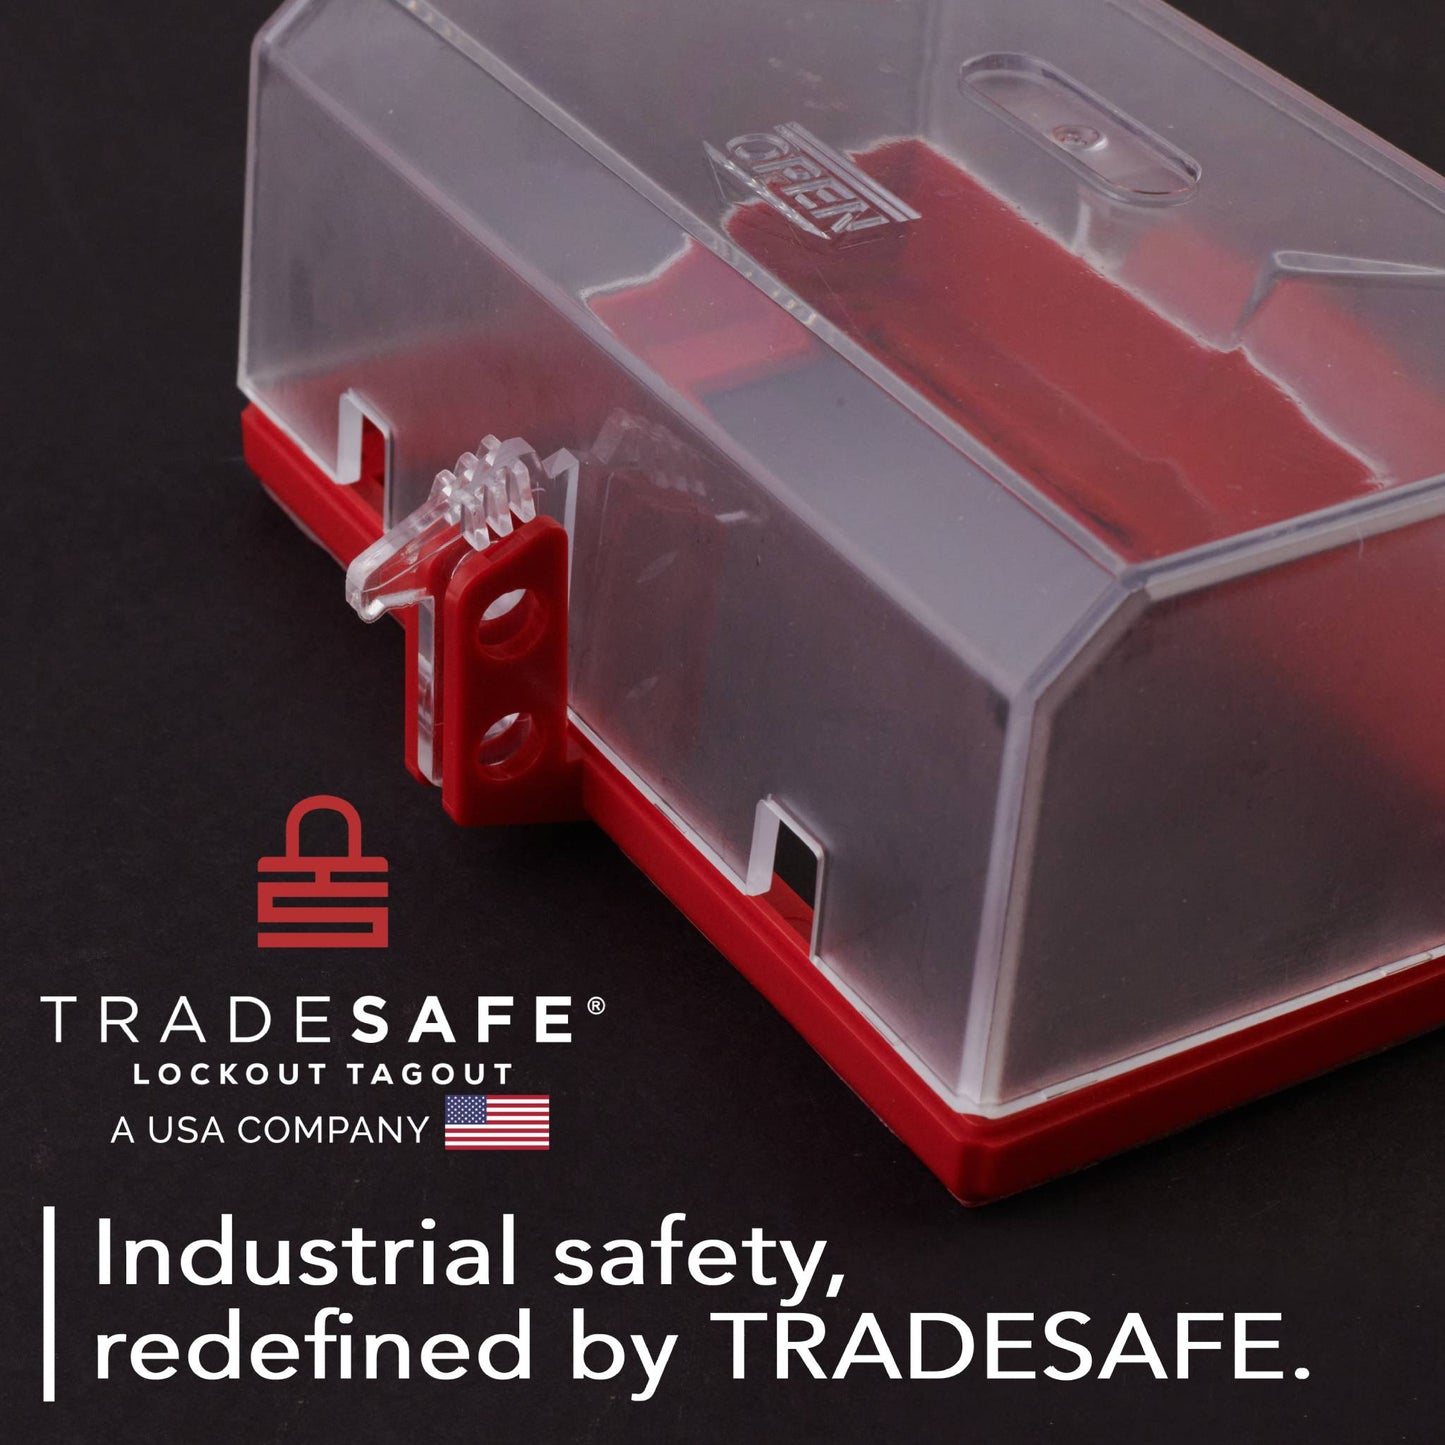 lockout tagout emergency stop button cover brand image; industrial safety redefined by tradesafe